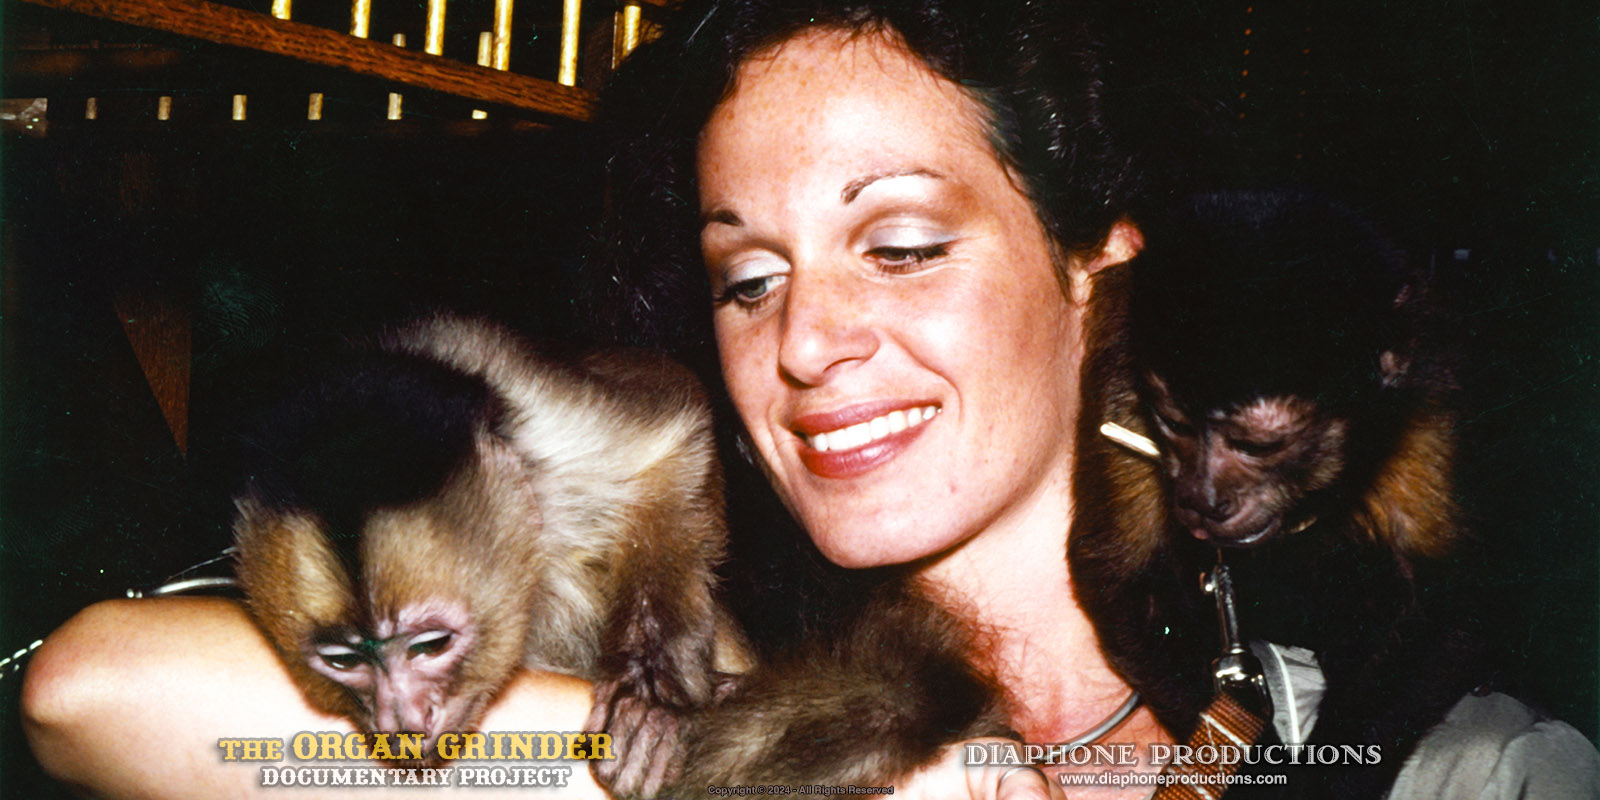 1970s photo of Vicki, the Organ Grinder's "Monkey Lady" with two small simian friends on her shoulders.